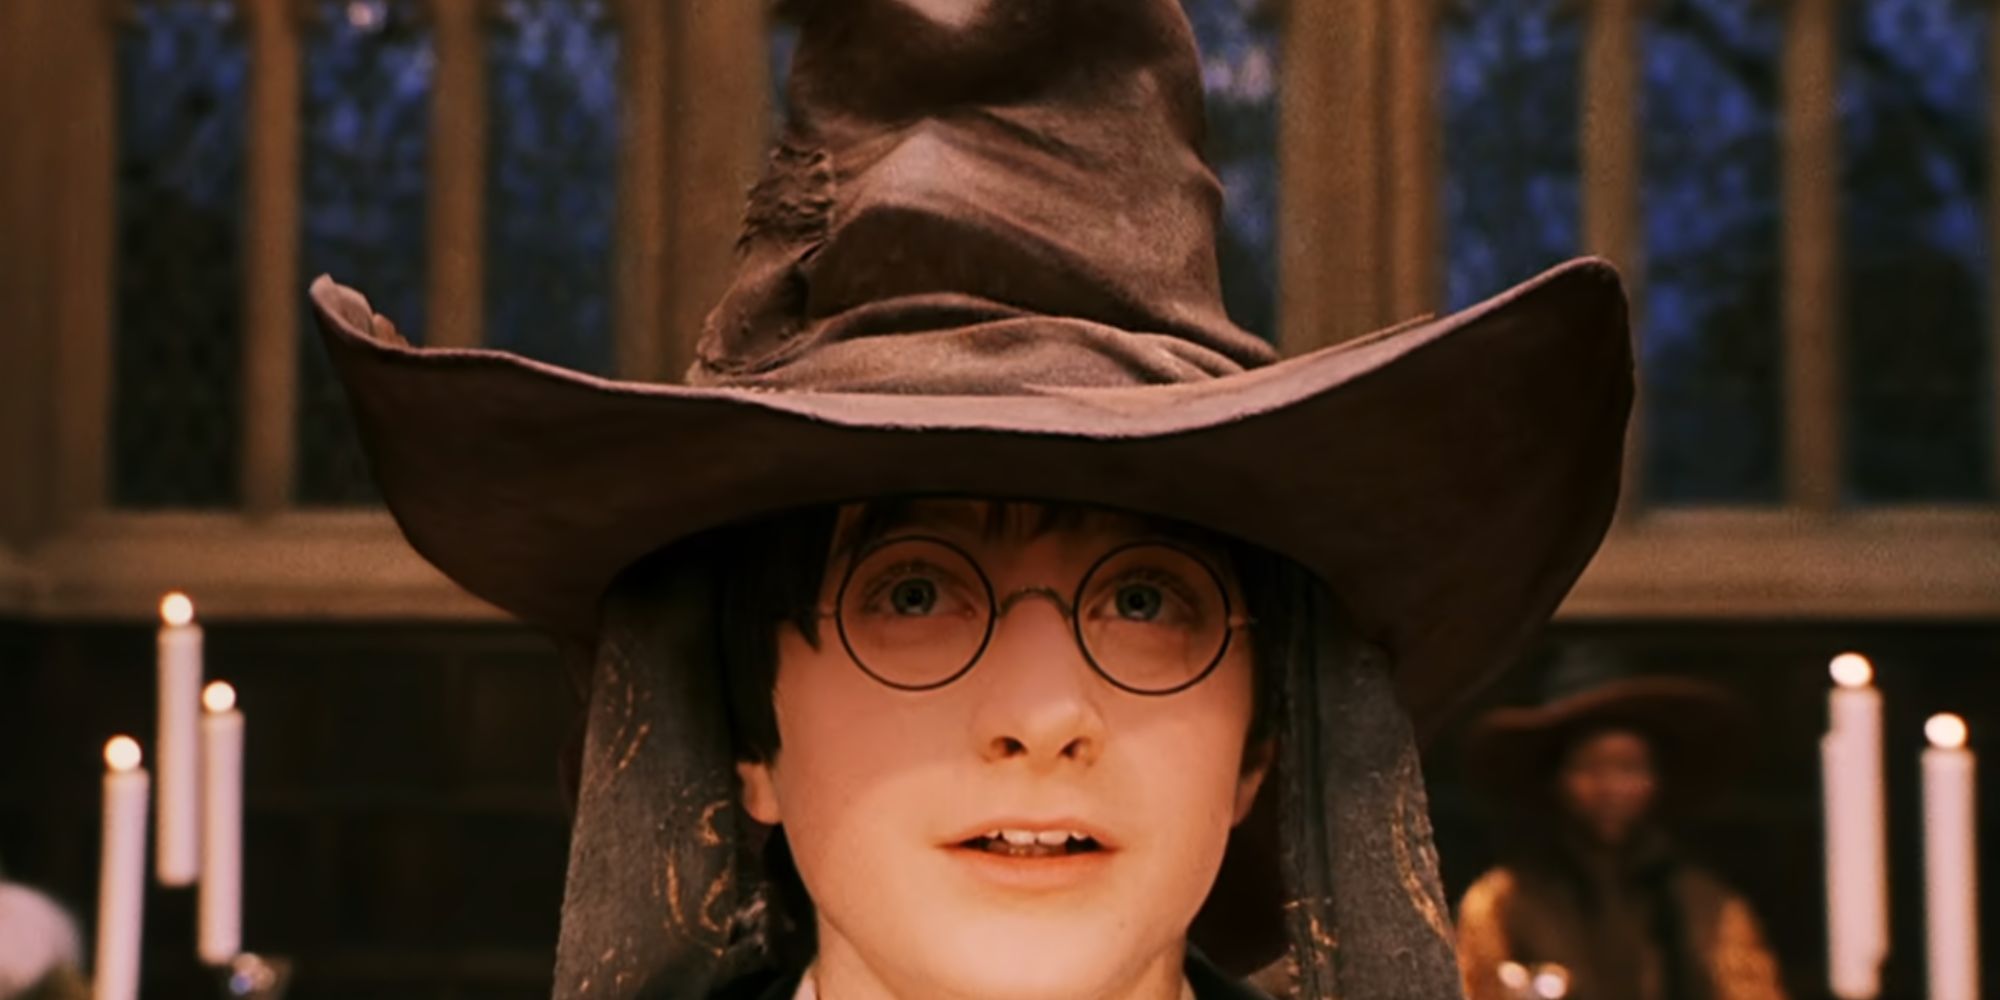 Daniel Radcliffe as Harry Potter in the first movie with the Sorting Hat on his head